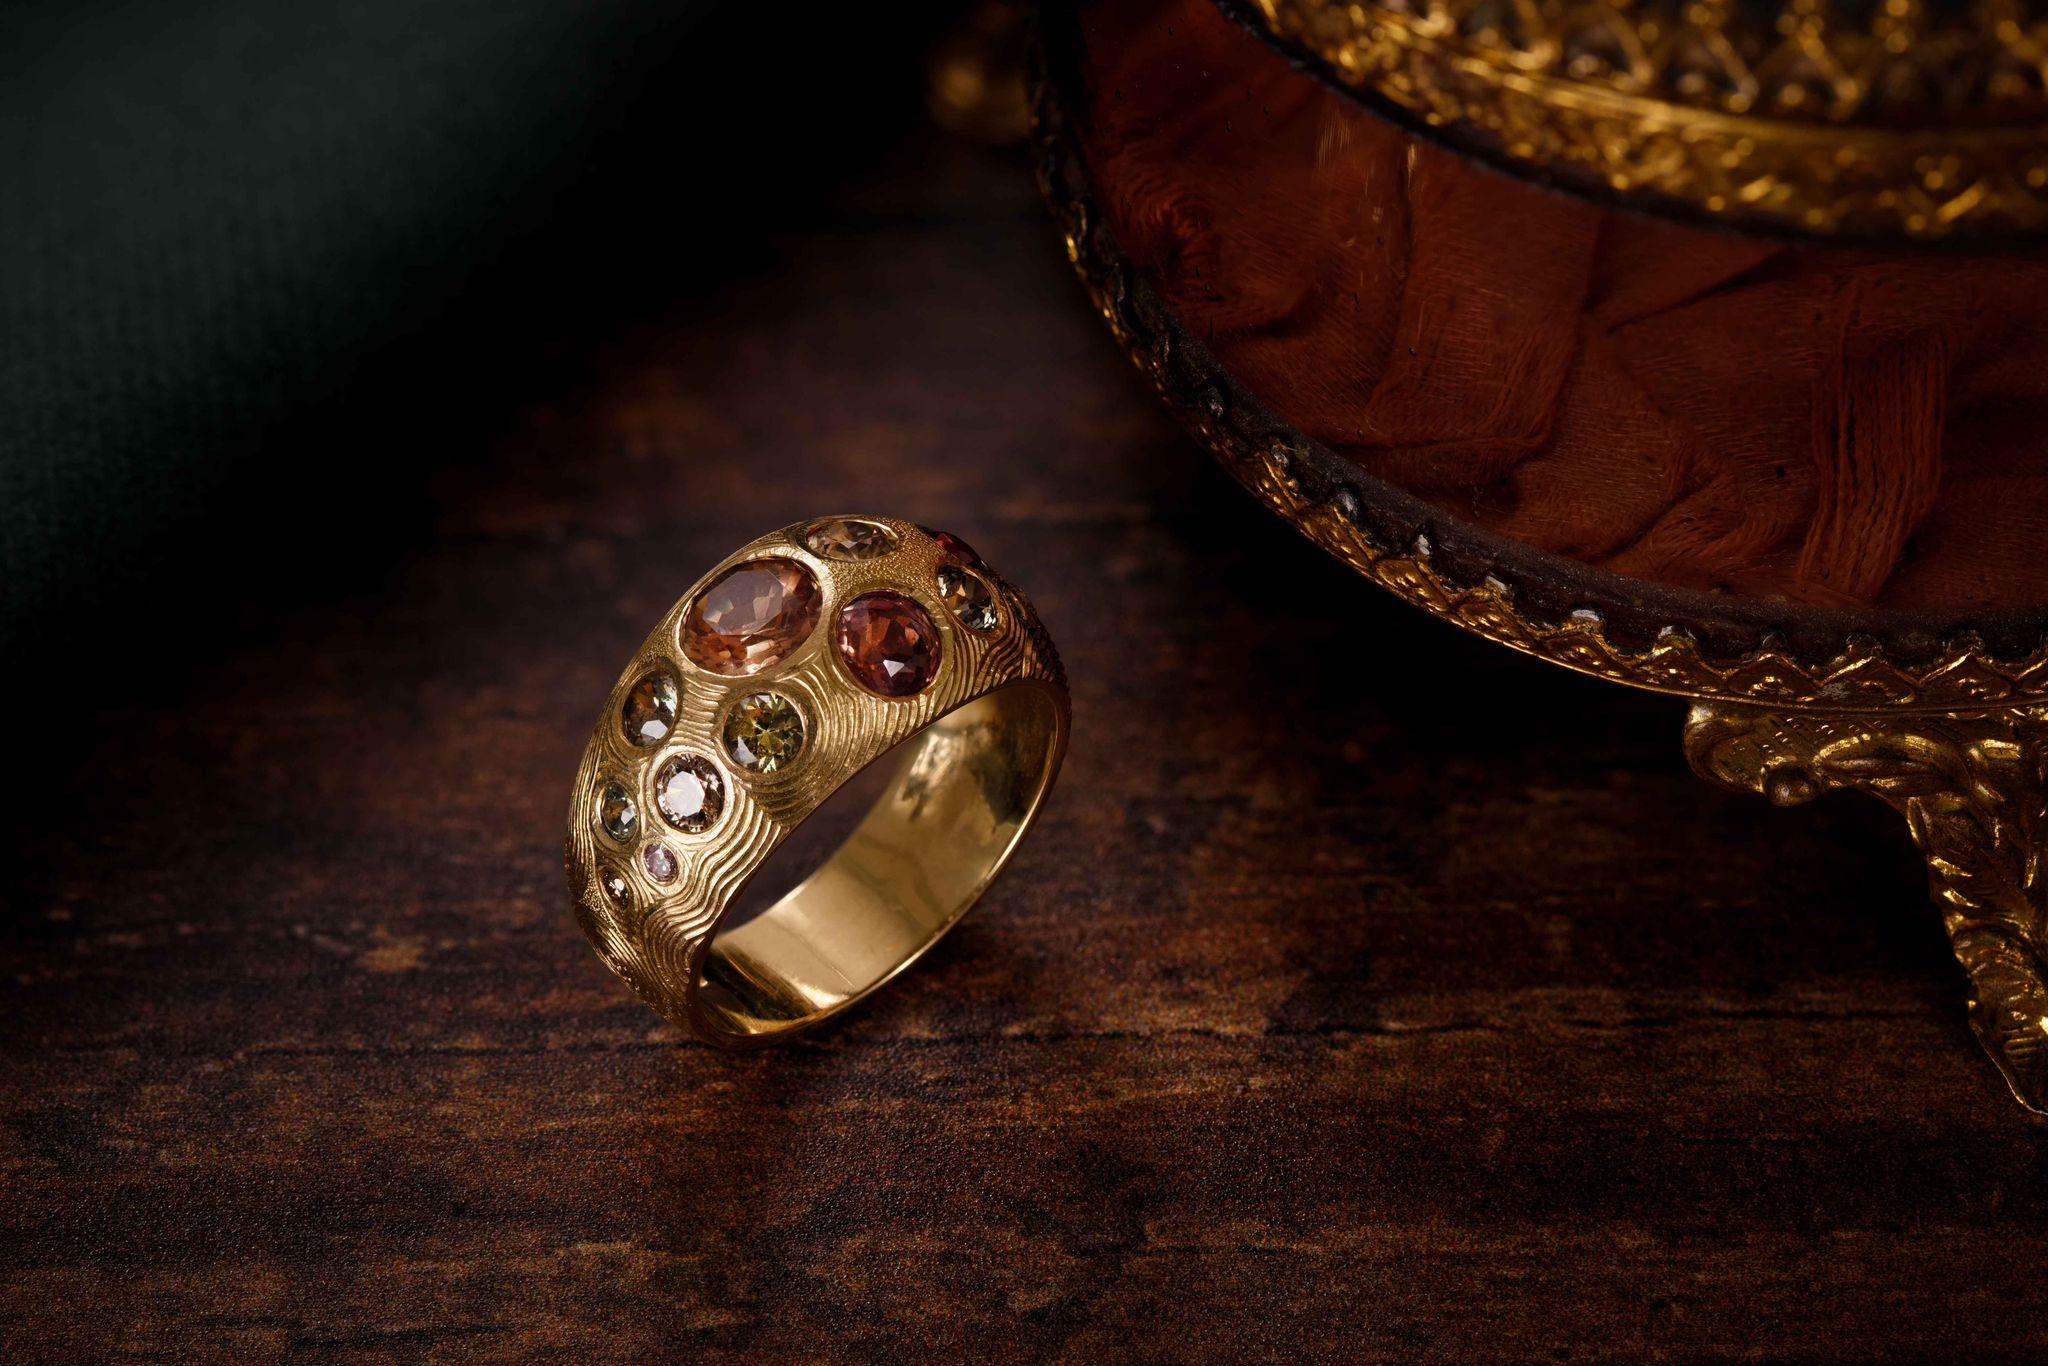 This Bombè ring was made, engraved and set entirely by hand. It is a one of a kind piece made by Master Goldsmith Ford Hallam Kinko Shi from The Remarkable Goldsmiths.